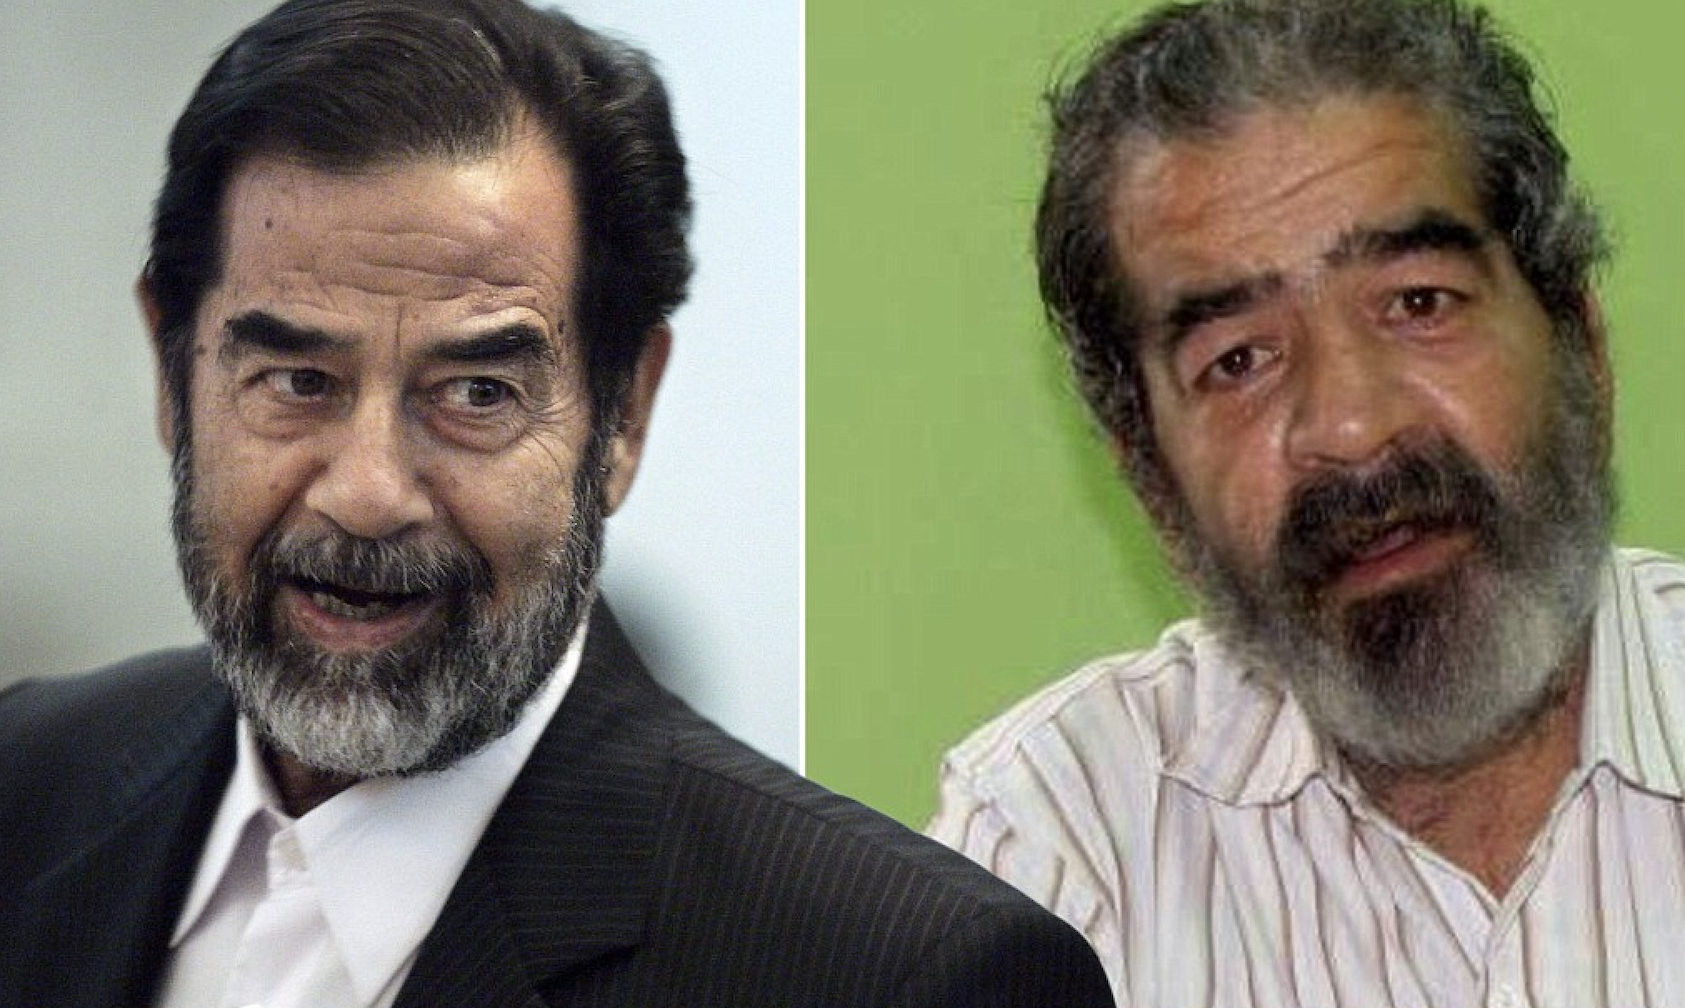 This poor Egyptian man, Mohamed Bishr, was attacked by a gang and almost kidnapped for looking like Saddam Hussein. They wanted him to star in an adult film. 